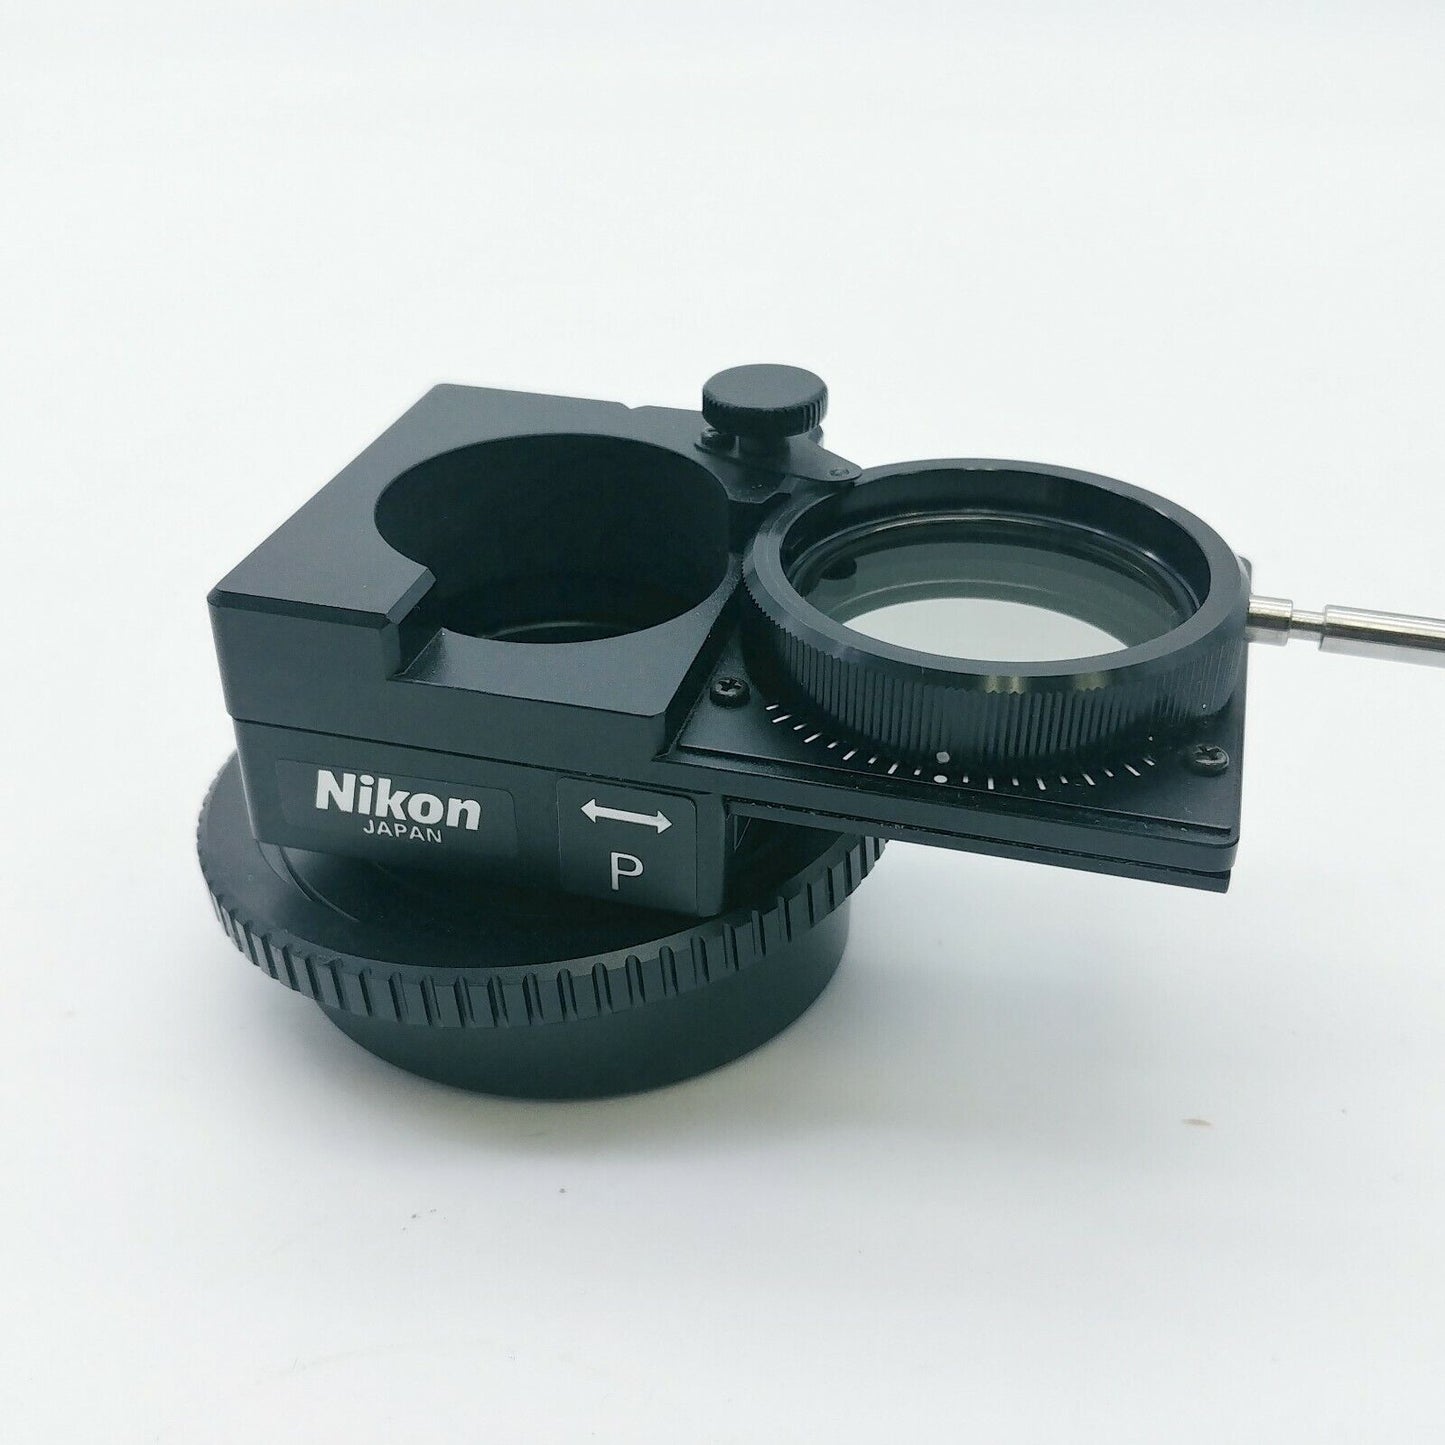 Nikon Microscope Slide Out Polarizer for use with DIC on TE200 / TE300 Inverted - microscopemarketplace